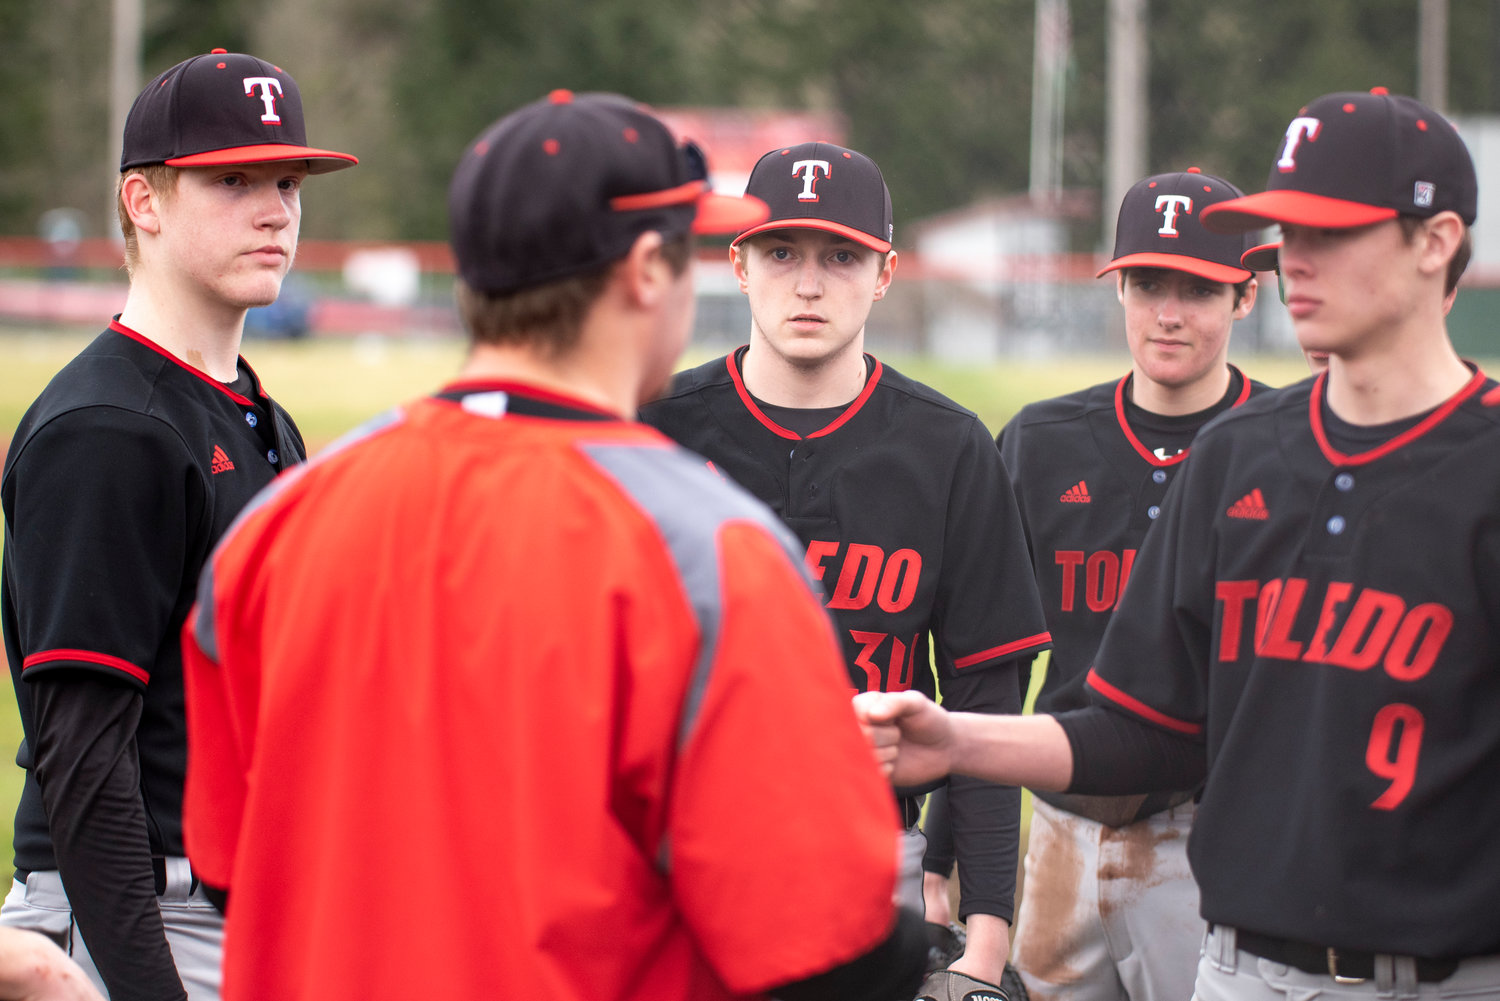 Toledo baseball coach Mack Gaul, foreground, talks to his team between innings during a road game at Tenino on March 16.